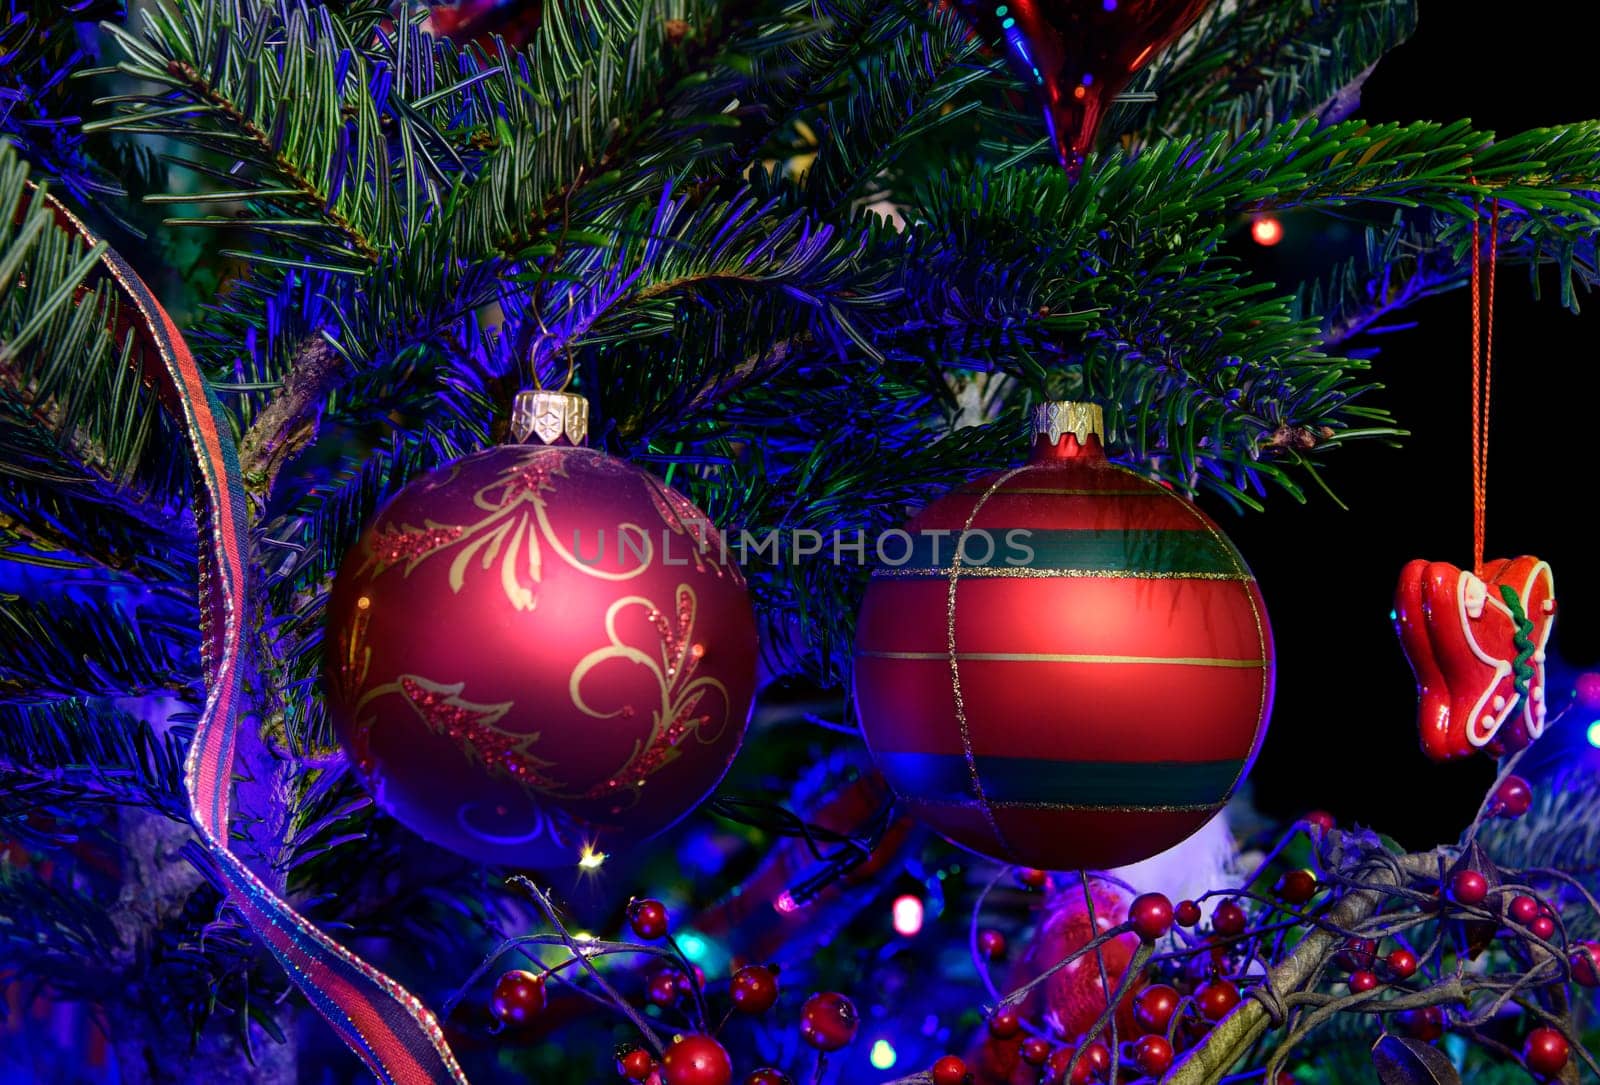 Festive Holiday Tree Decorated with Christmas Ornaments and Lights by Youri